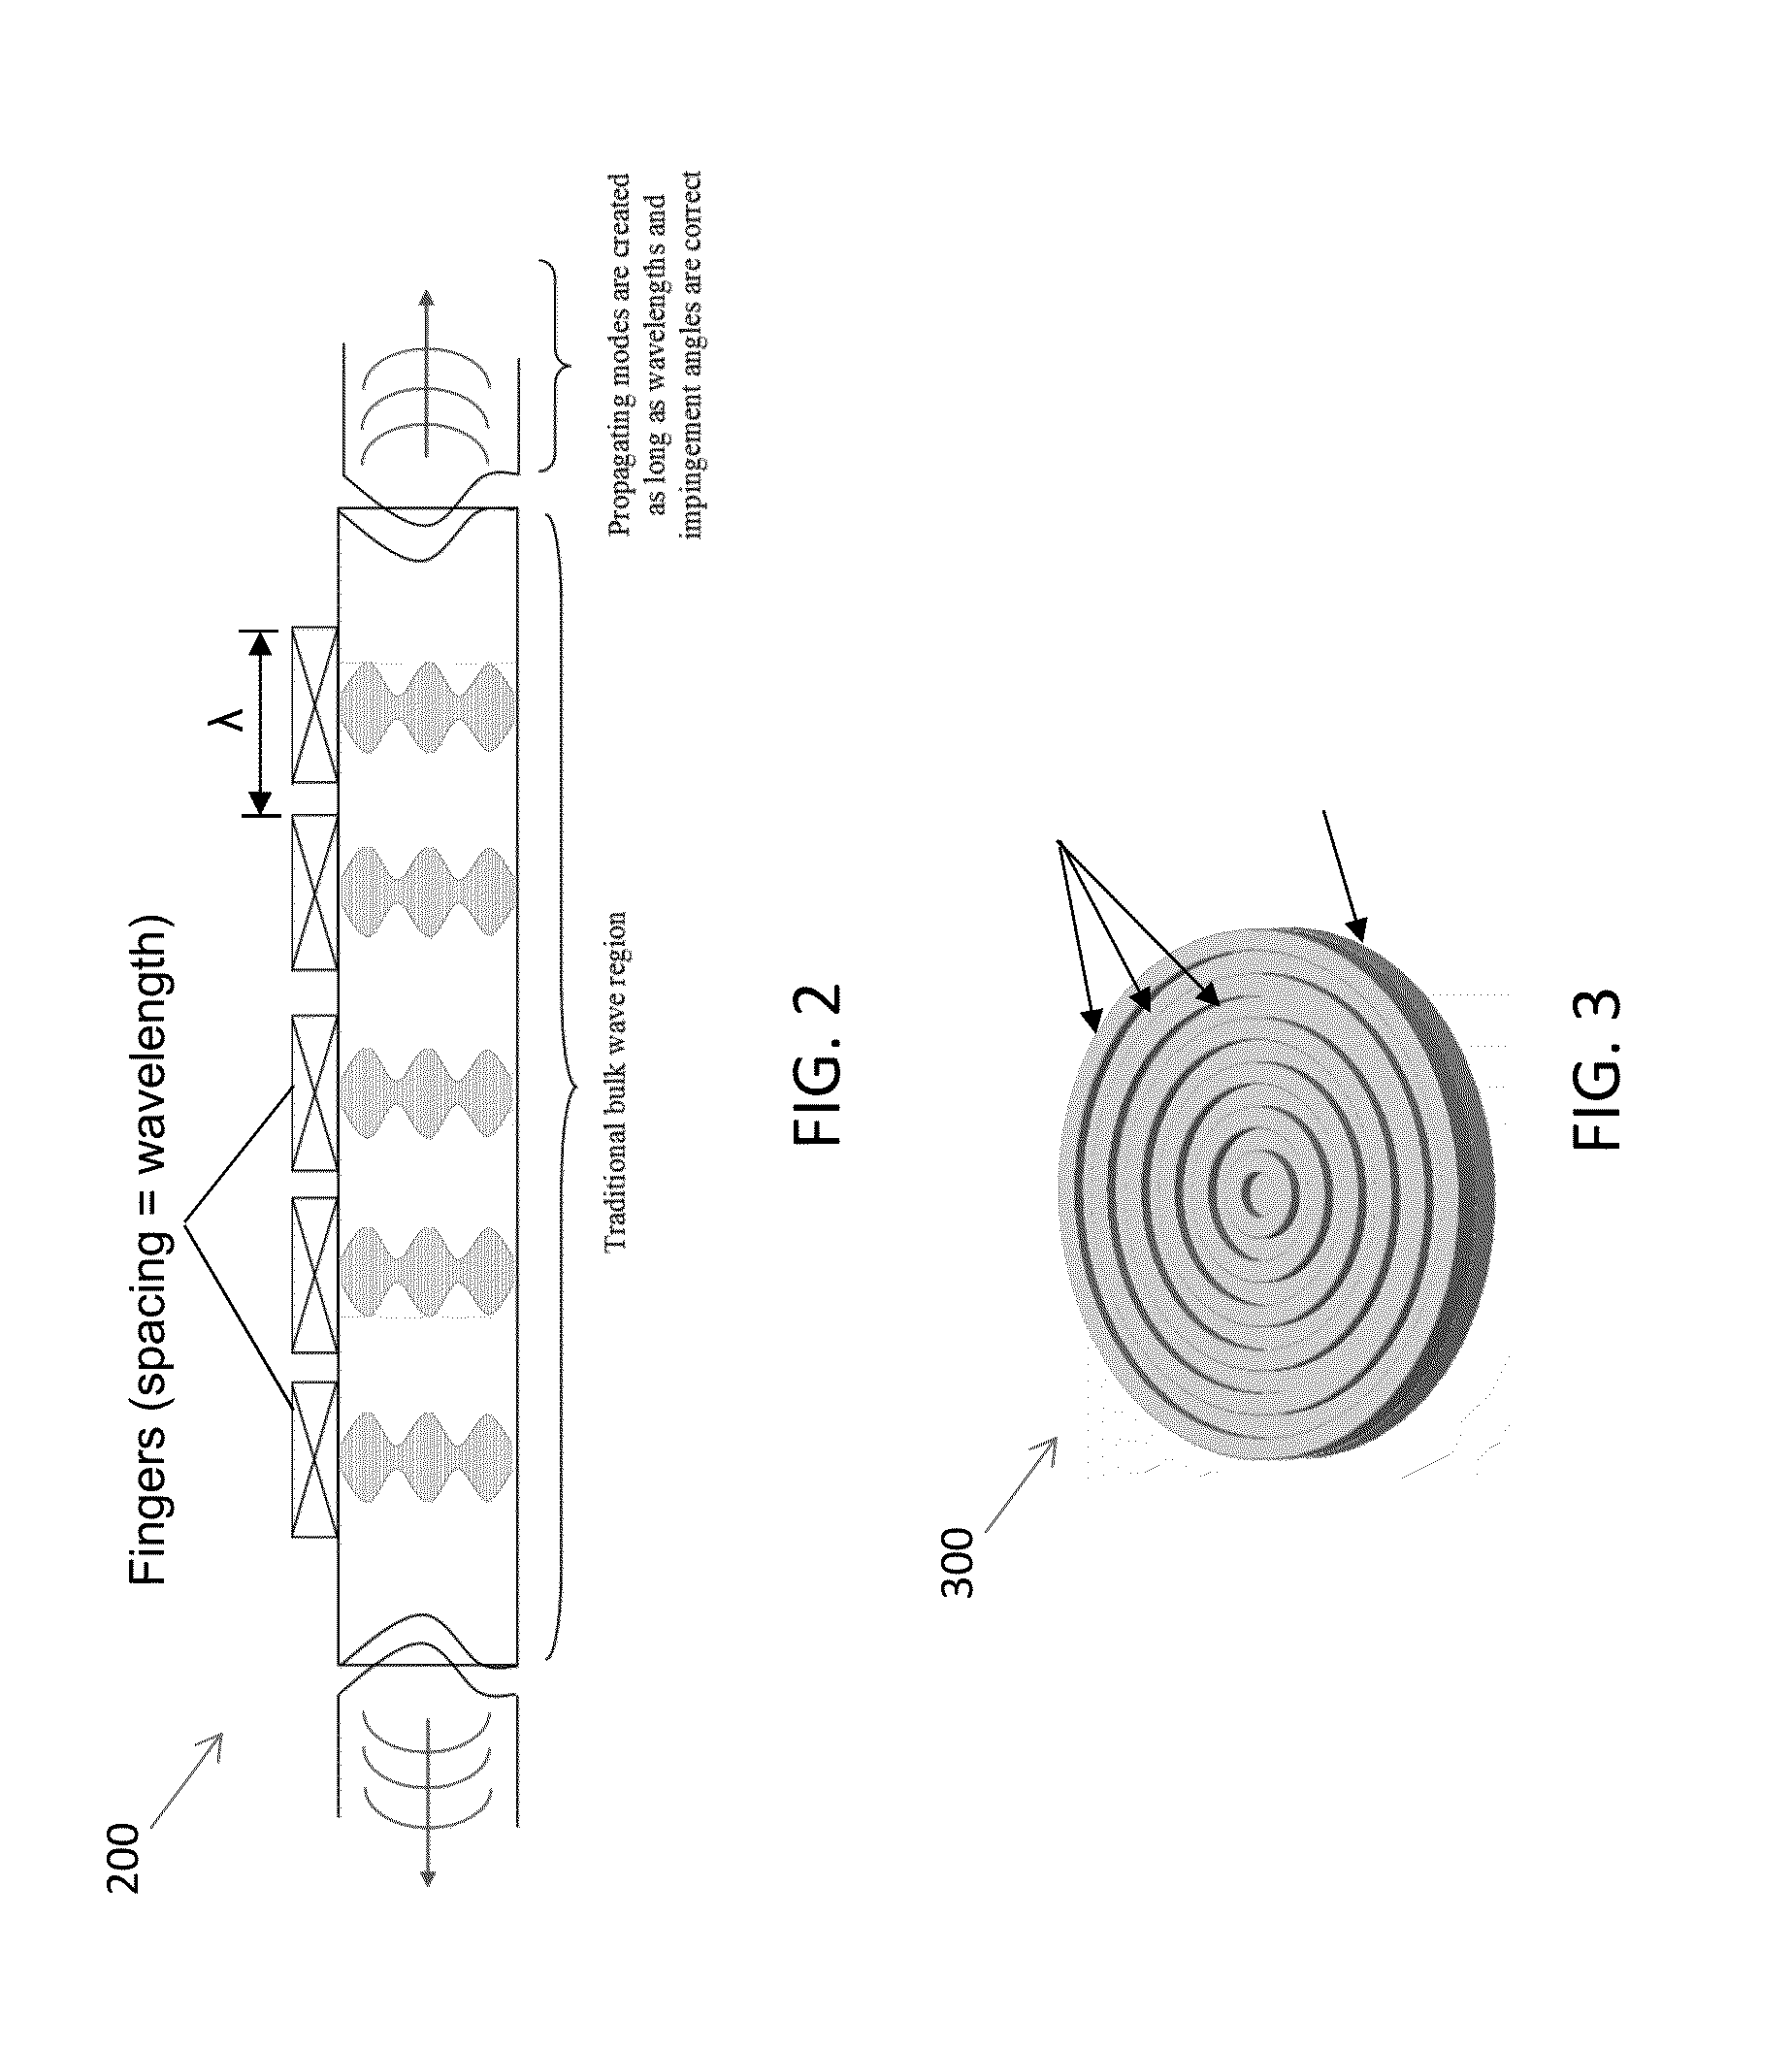 Ultrasonic vibration system and method for removing/avoiding unwanted build-up on structures